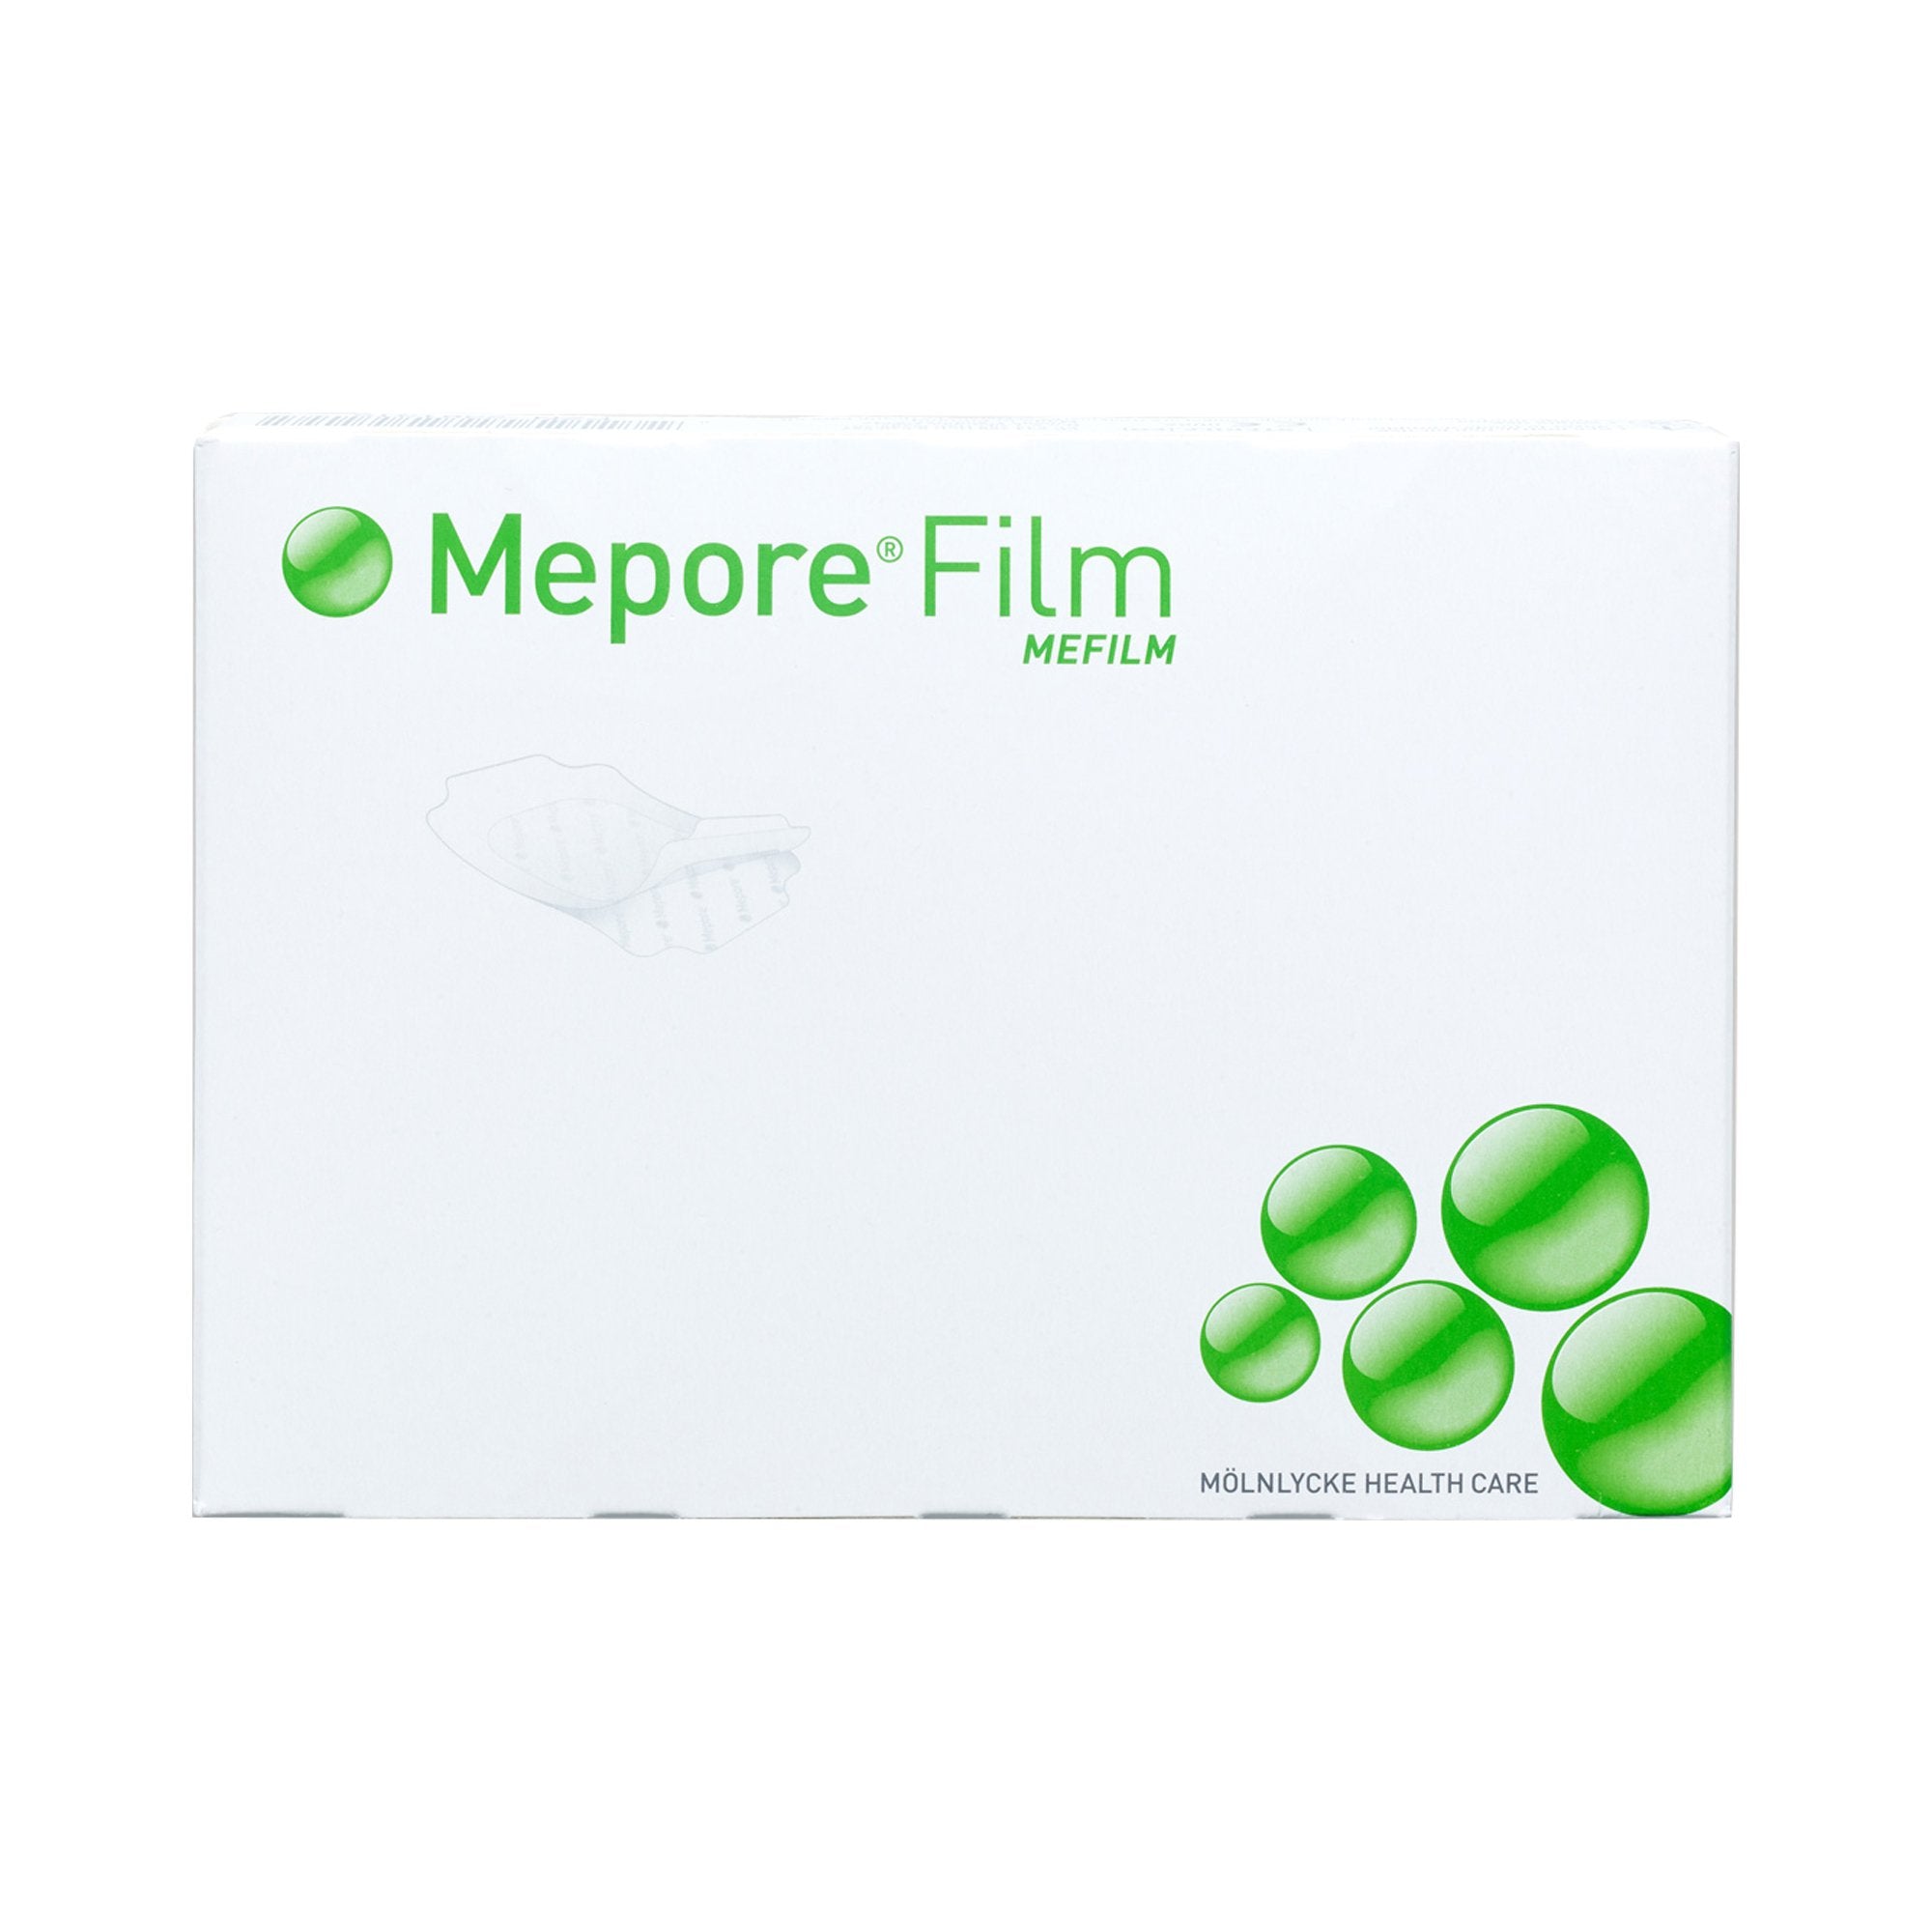 Transparent Film Dressing Mepore® Film 2-2/5 X 2-3/5 Inch Frame Style Delivery Rectangle Sterile